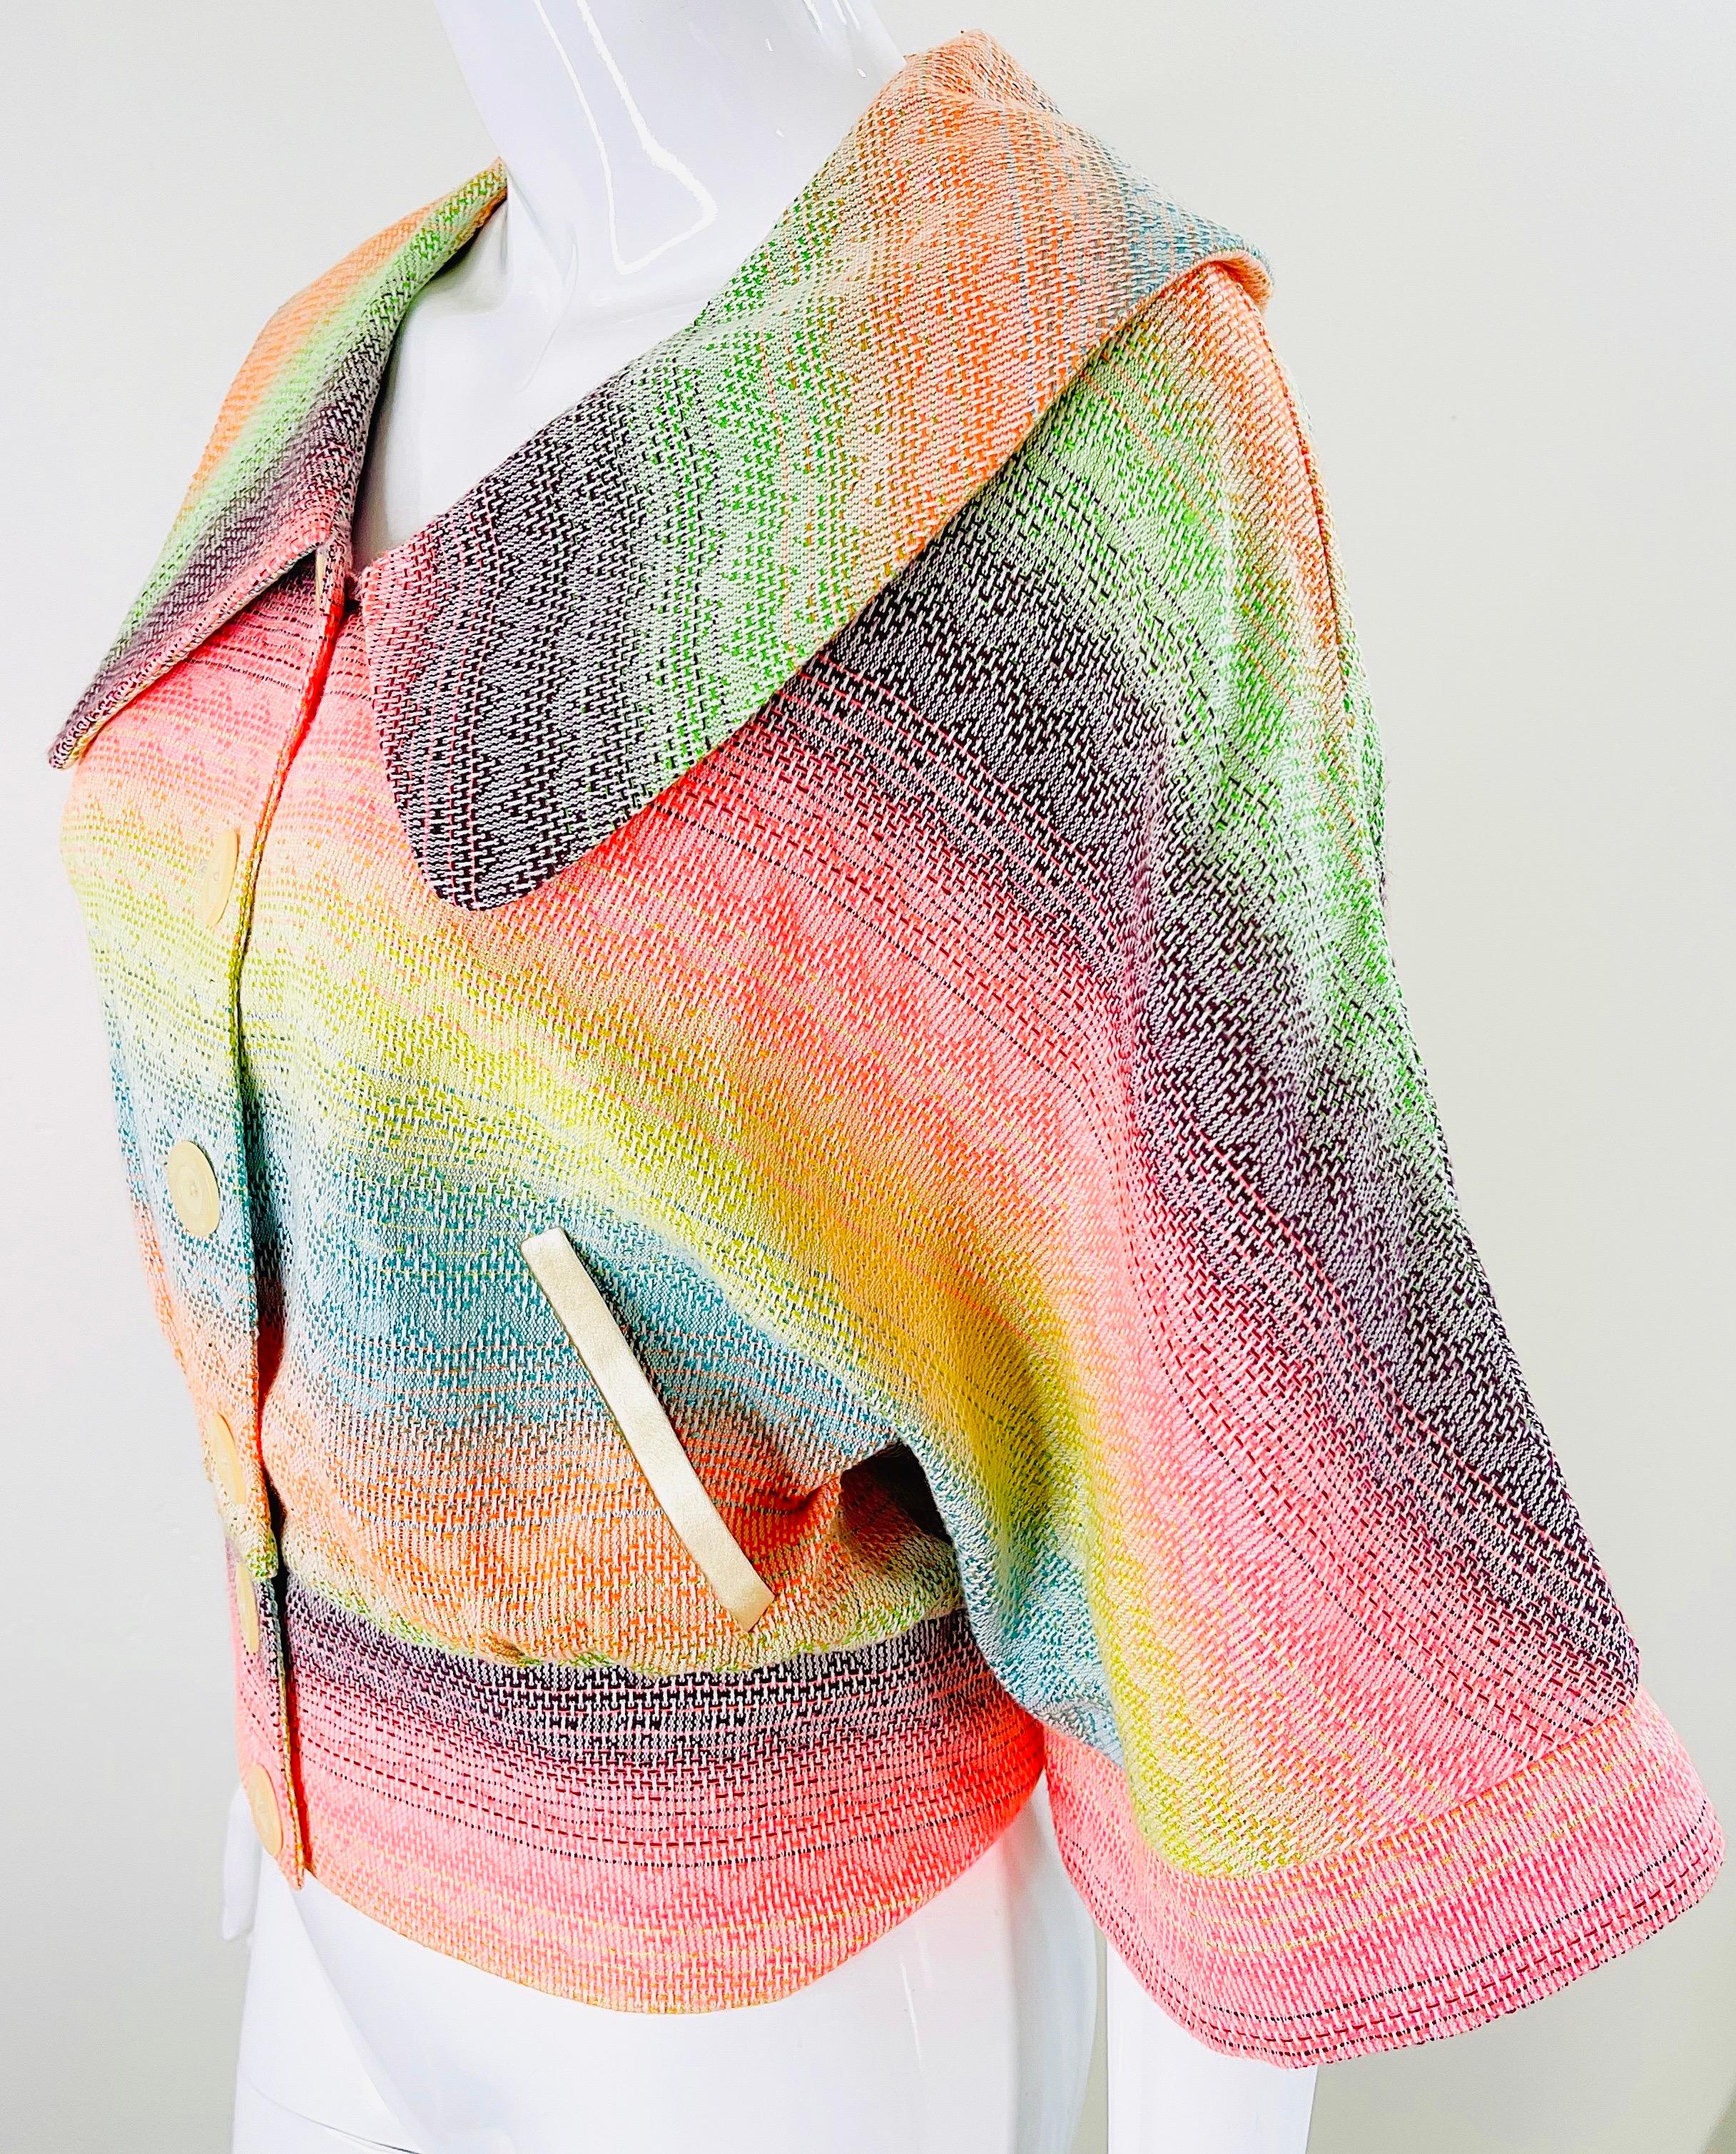 Matthew Williamson Spring 2002 Sz 8 Colorful Rainbow Striped 3/4 Sleeves Jacket  For Sale 8